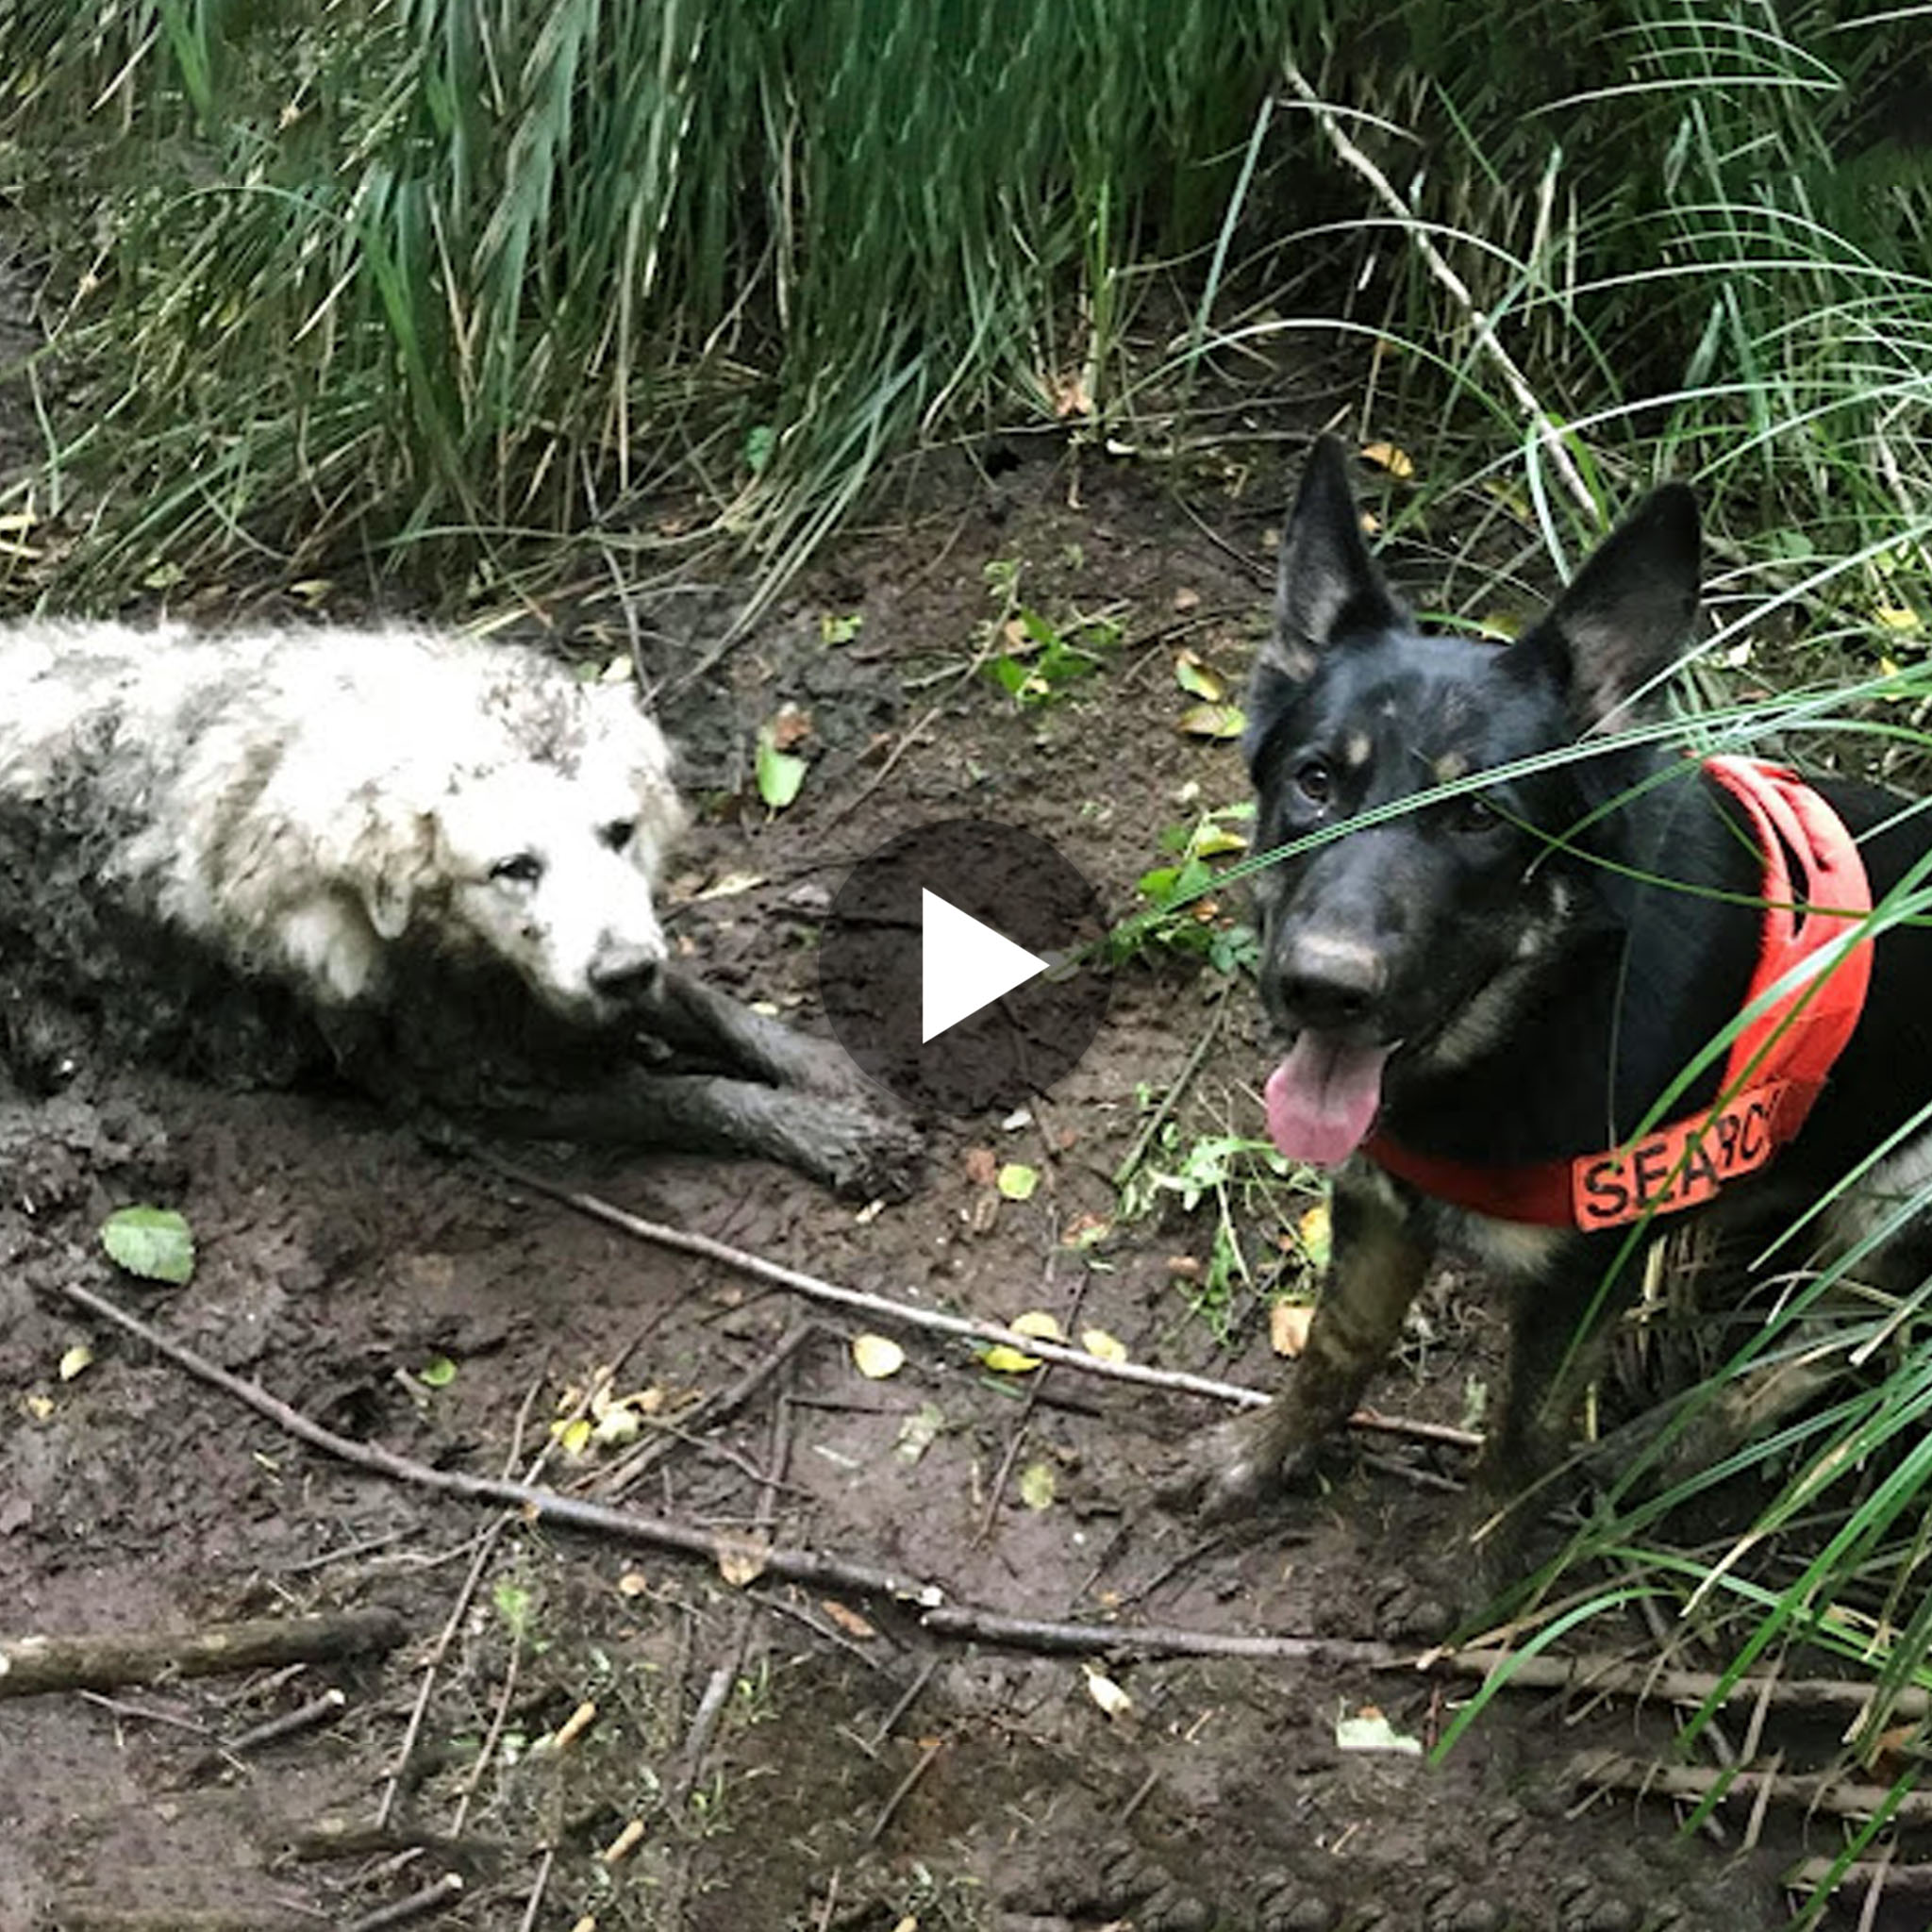 A brave rescue dog found an old deaf dog stuck in mud for 2 days in the deep forest.